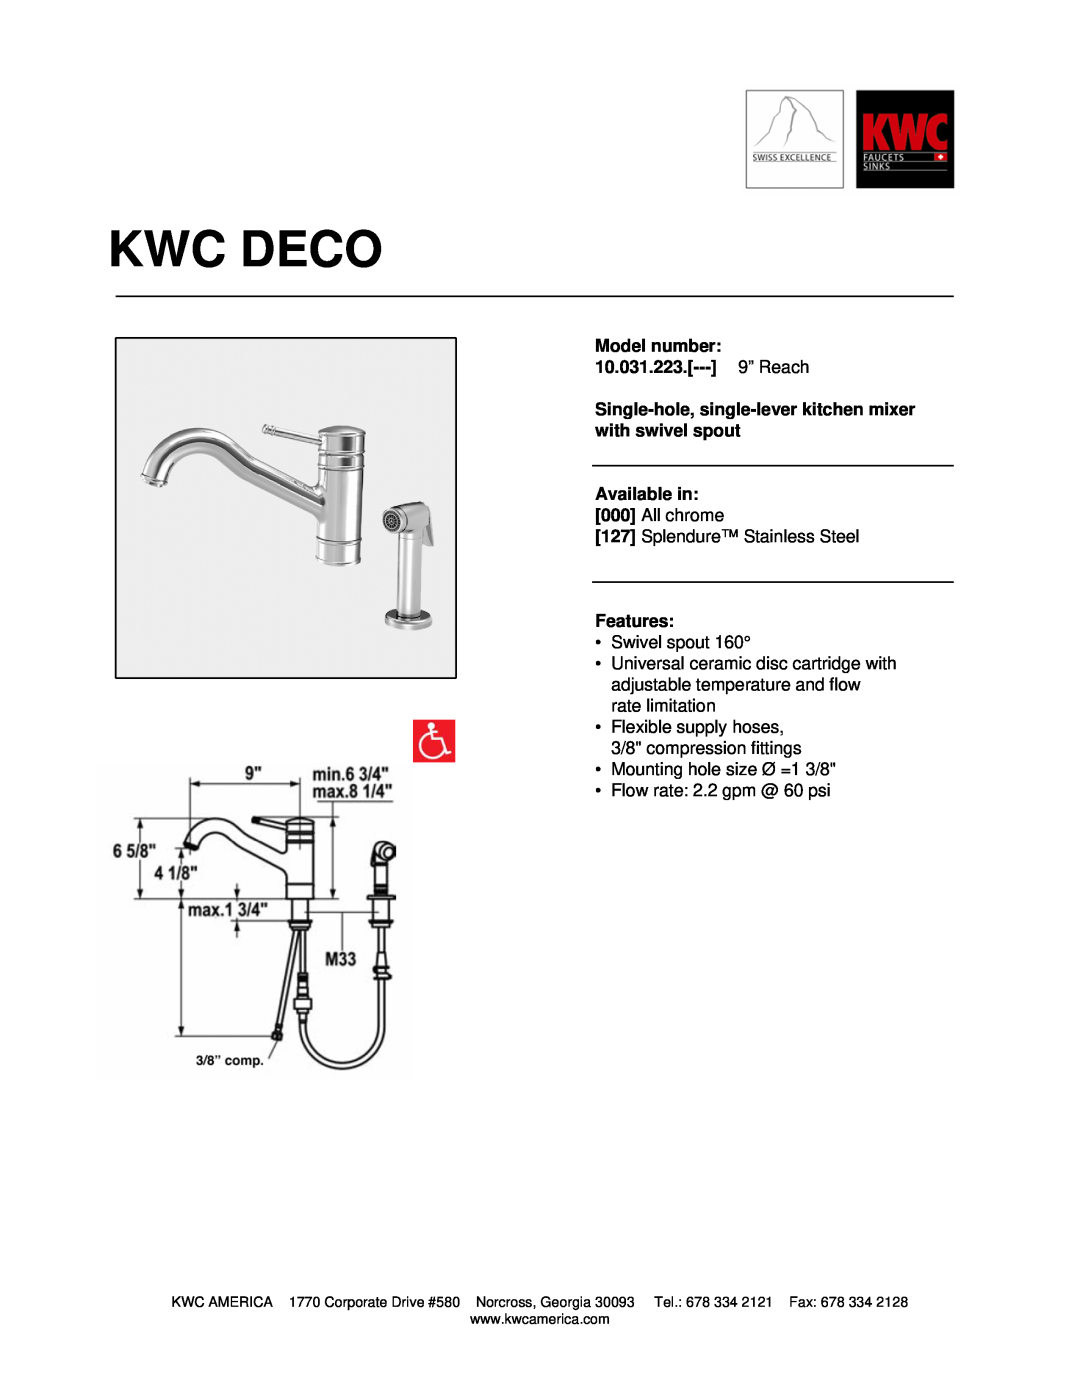 KWC manual Kwc Deco, Model number 10.031.223.--- 9” Reach, Available in, Features 